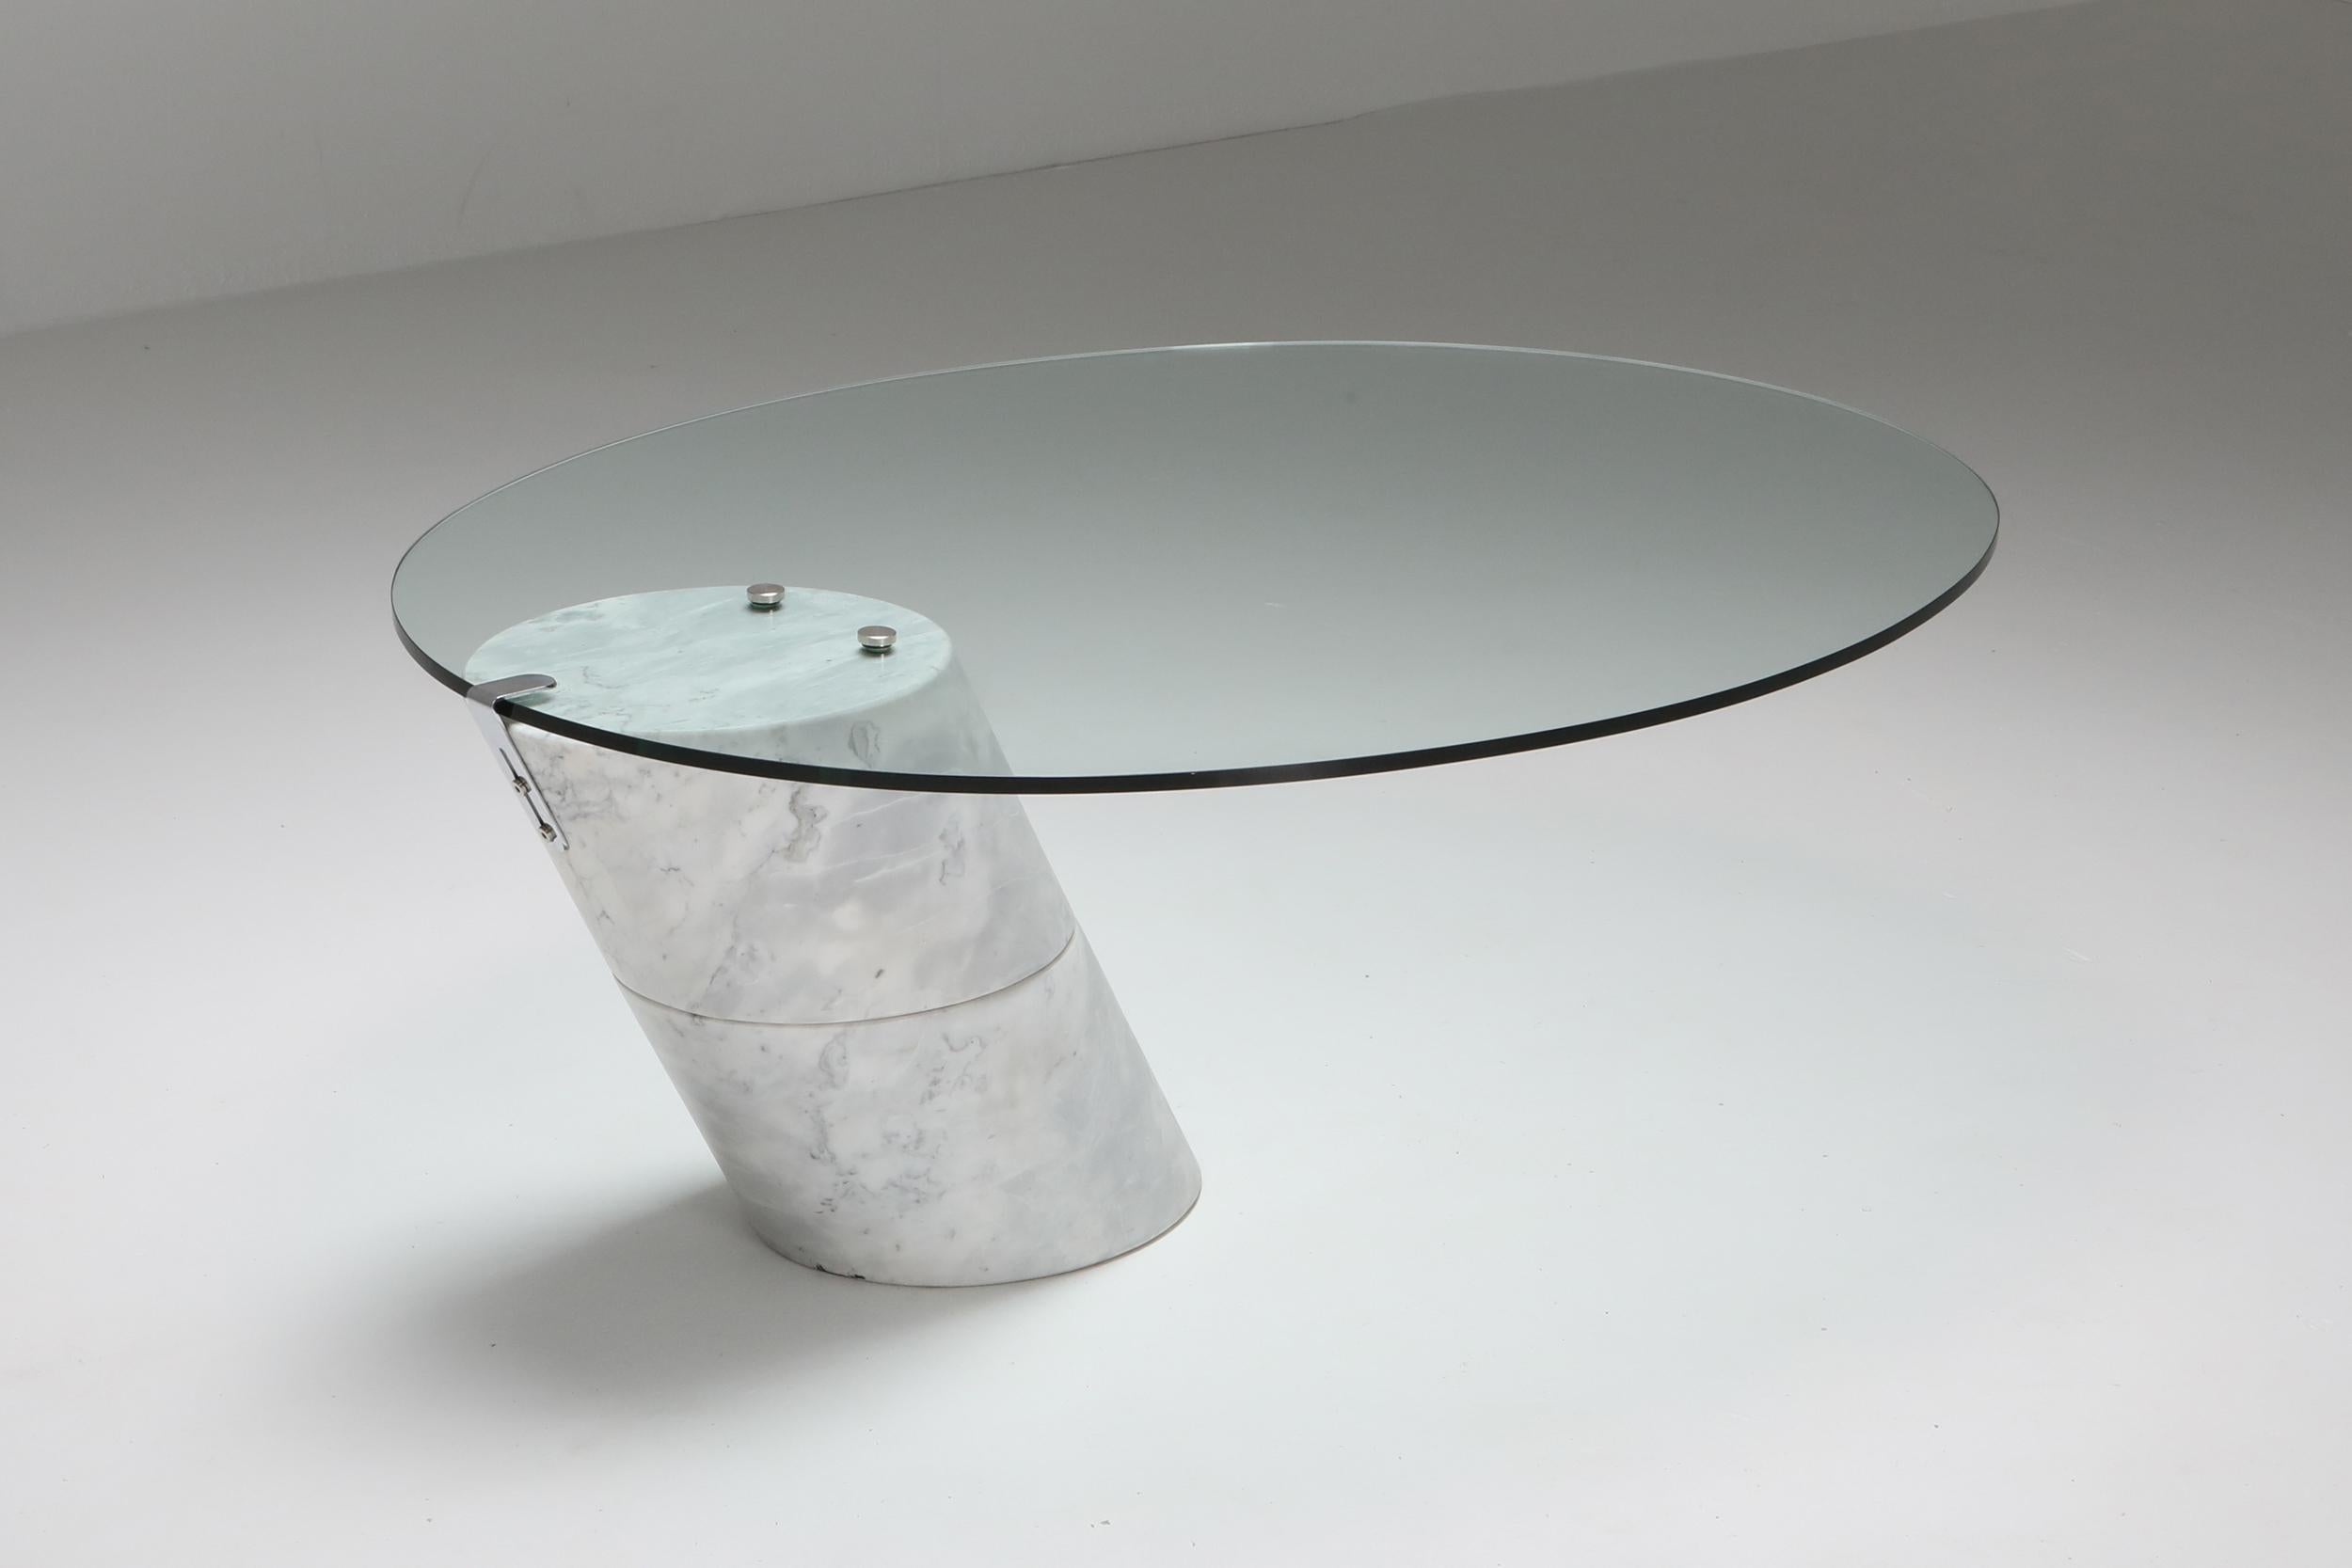 Glass Carrara Marble Coffee Table, K1000, Team Form AG, Ronald Schmitt, 1975

This white marble and glass coffee table, model K1000, was created by Team Form AG for Ronald Schmitt in 1975. What makes the item rather minimalist is the use of few